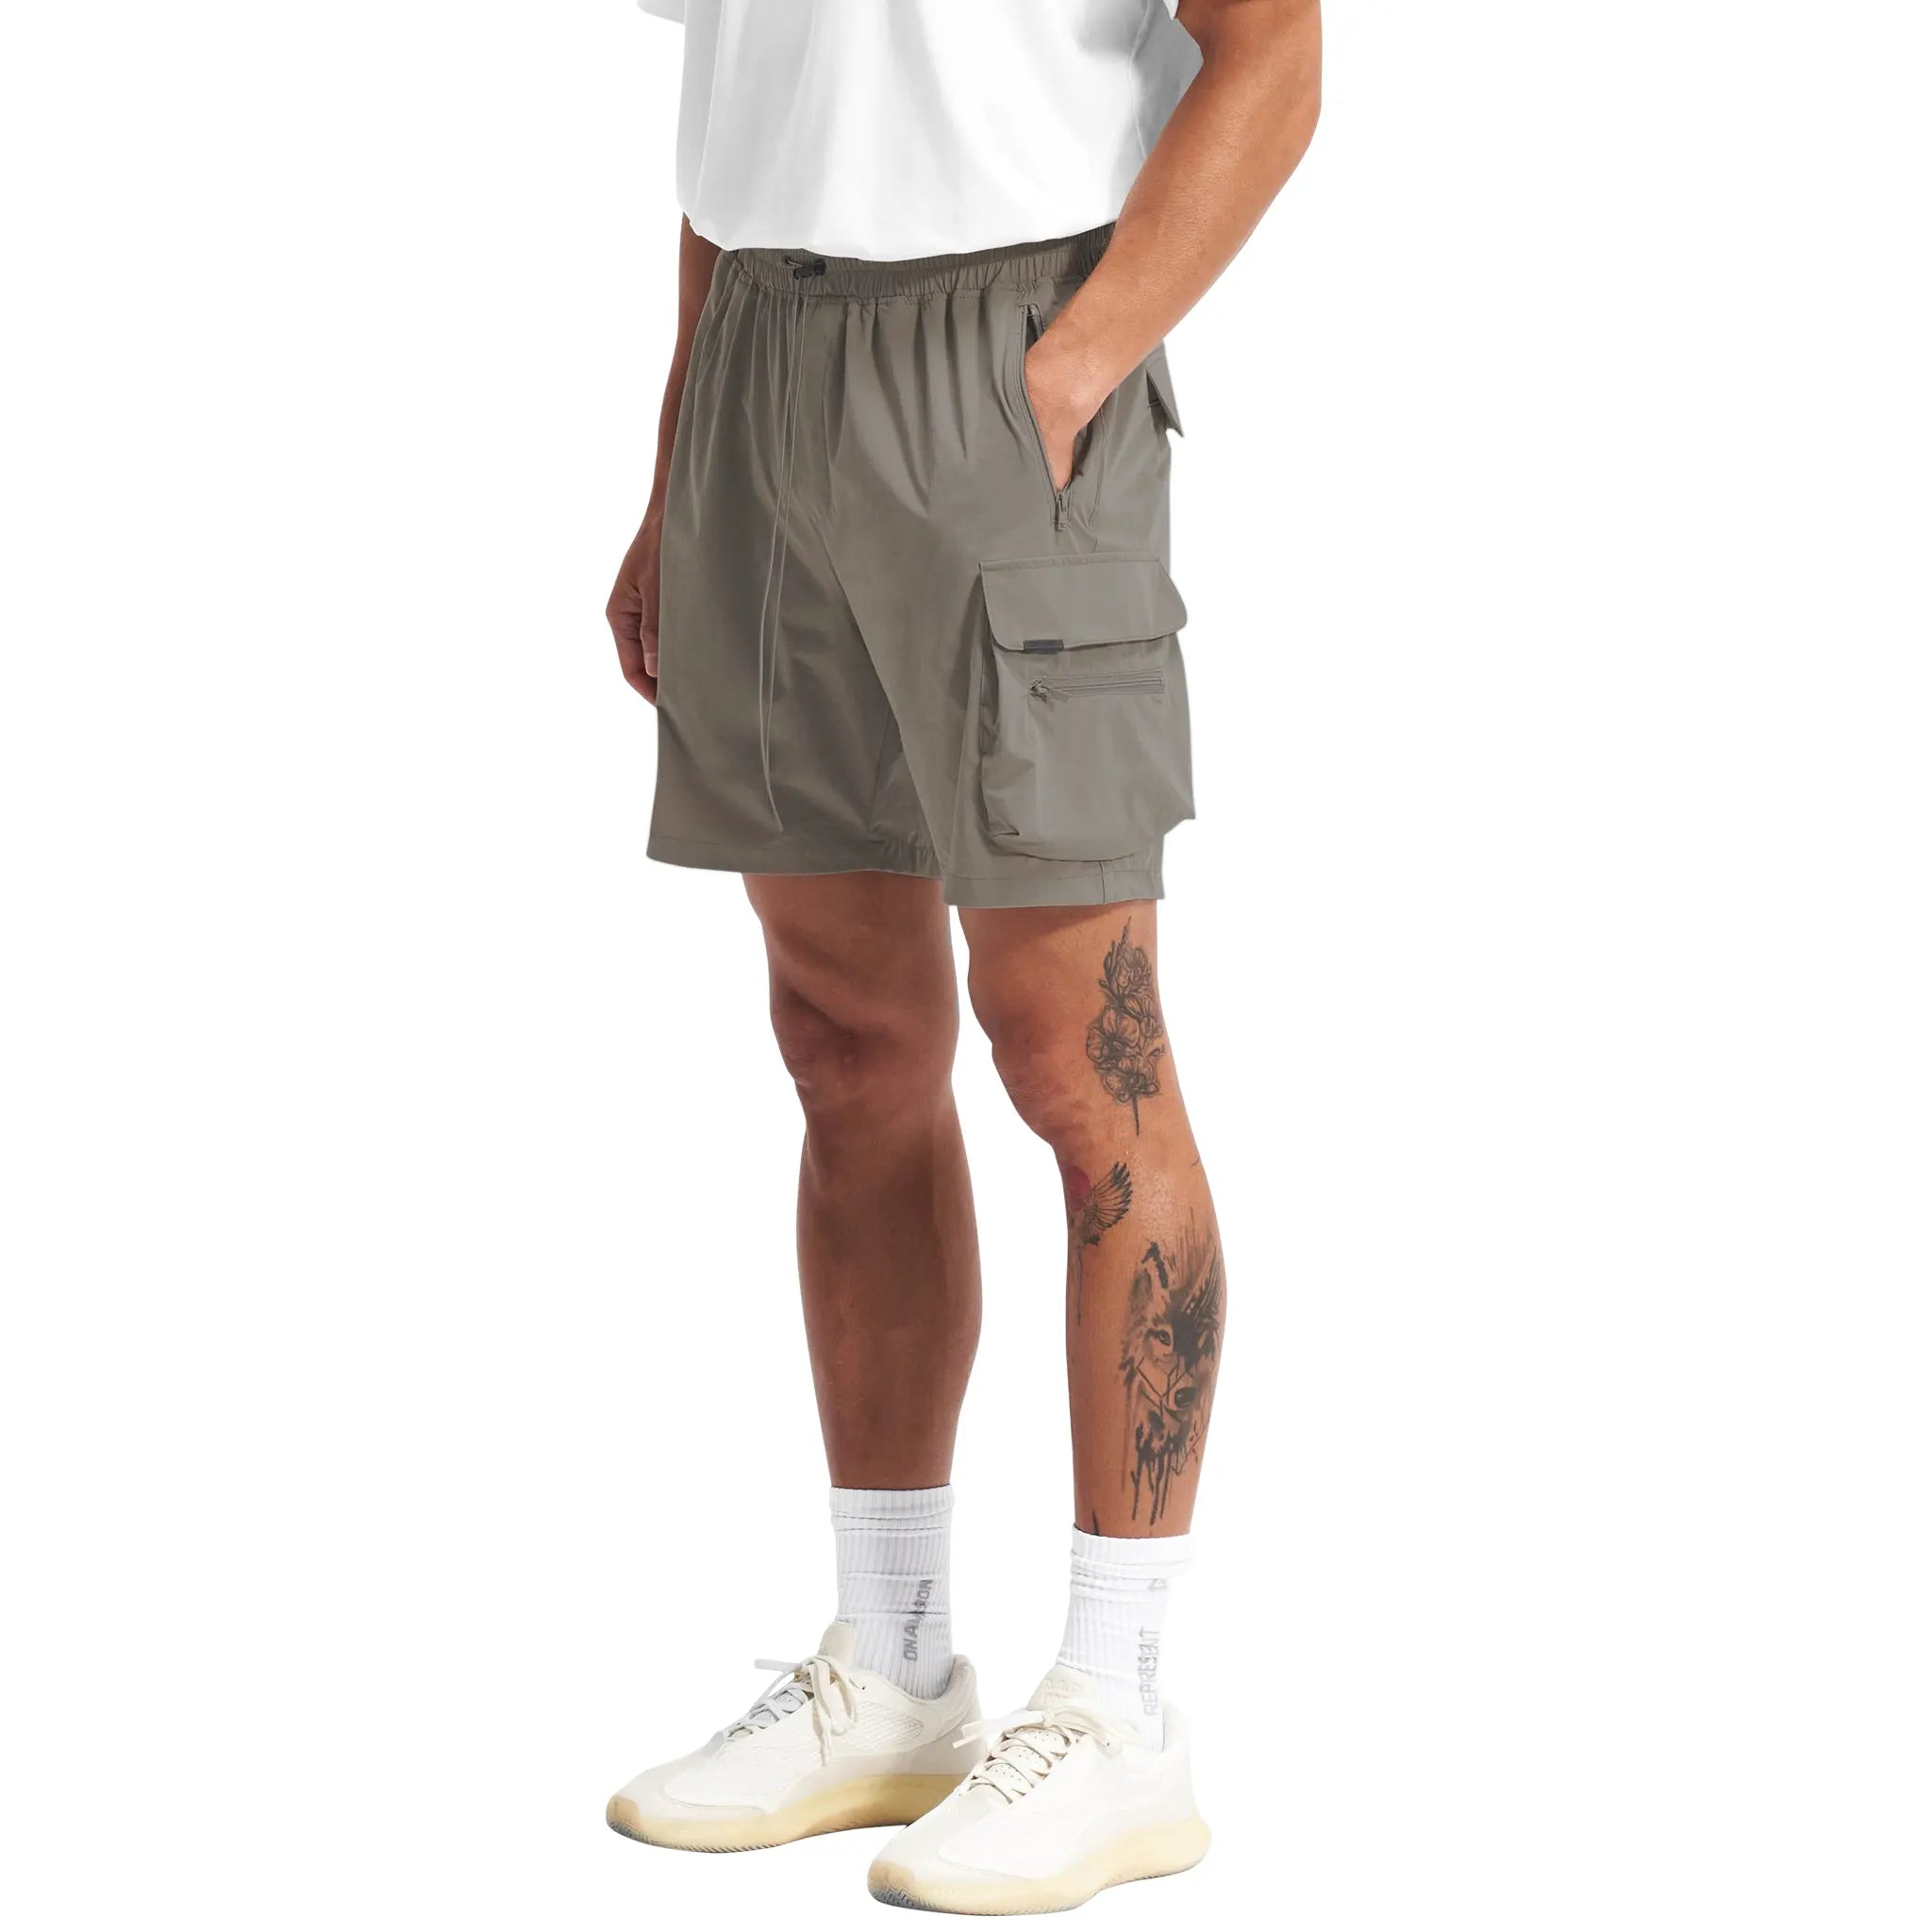 Front Detail view of Represent 247 Olive Shorts M09028-07